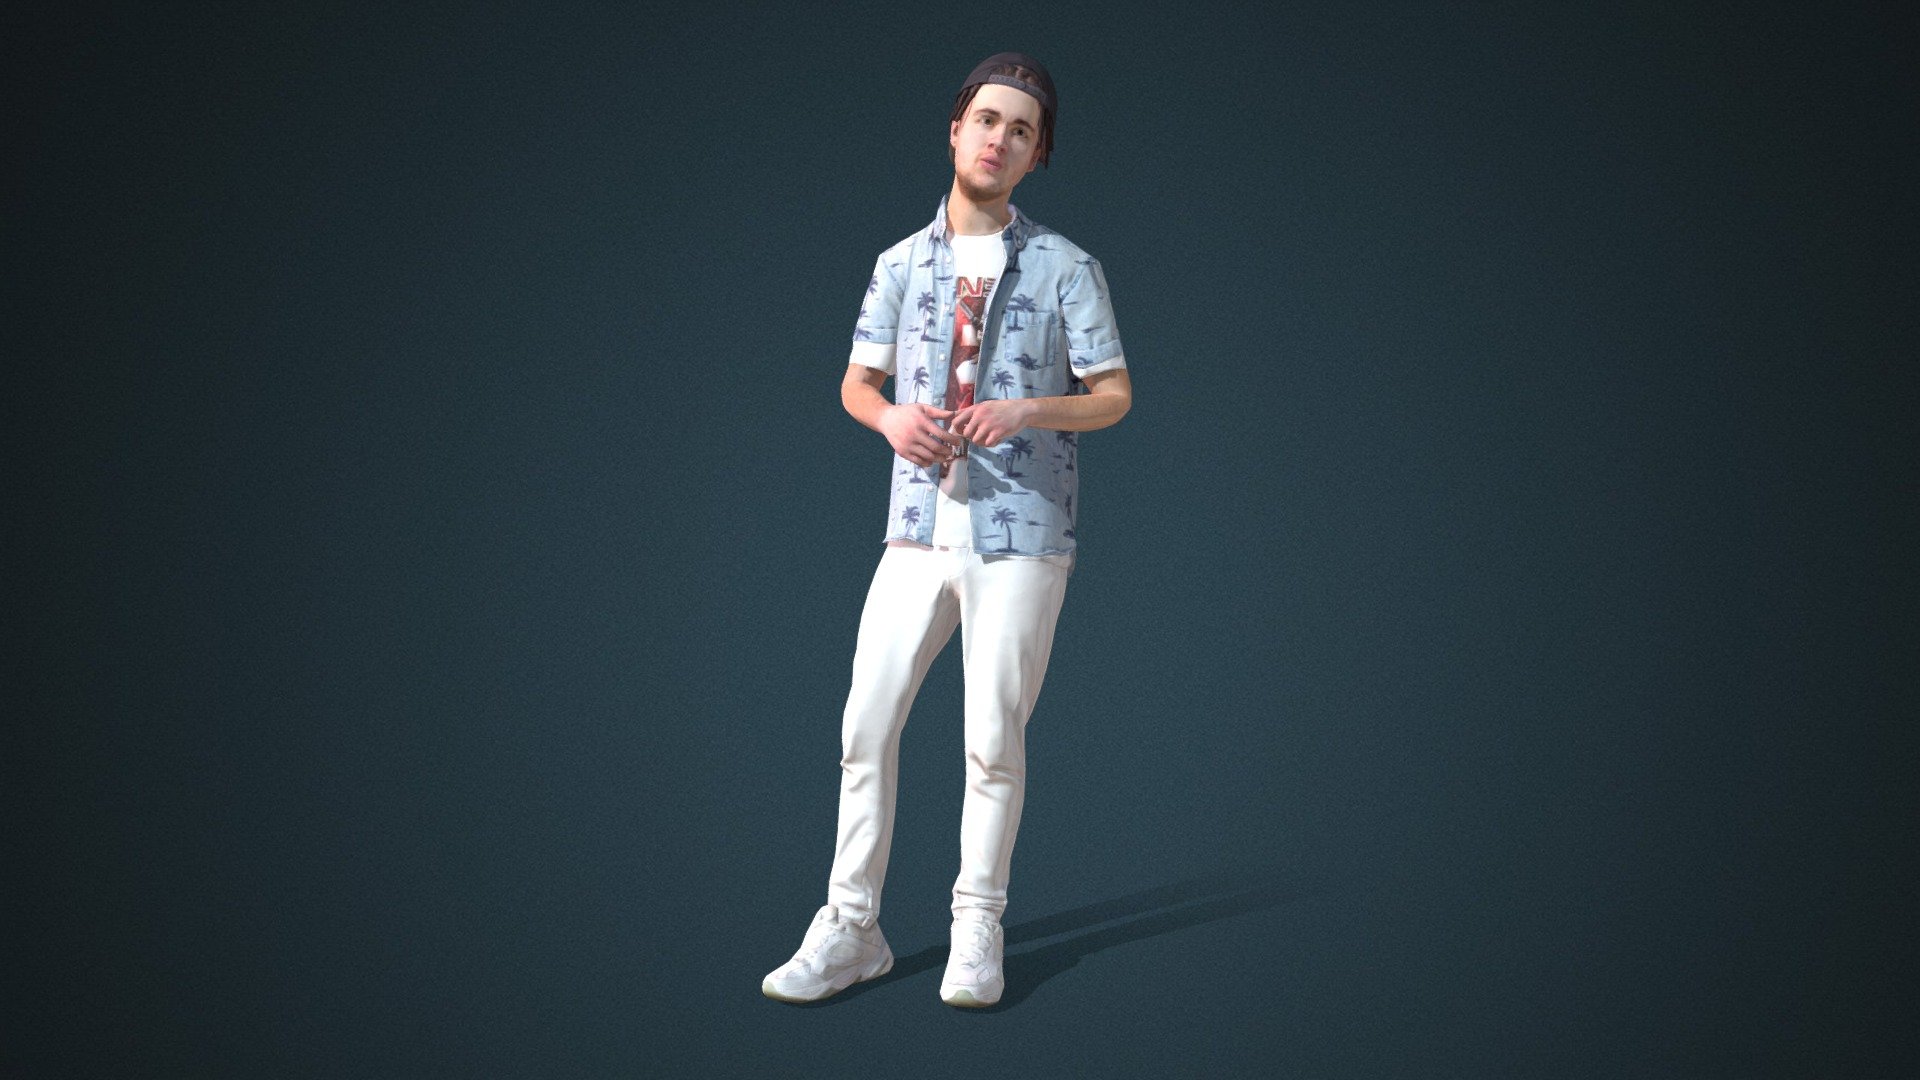 Do you like this model?  Free Download more models, motions and auto rigging tool AccuRIG (Value: $150+) on ActorCore
 

This model includes 2 mocap animations: Modern_M_Talk,Male_walk. Get more free motions

Design for high-performance crowd animation.

Buy full pack and Save 20%+: Young Fashion Vol.4


SPECIFICATIONS

✔ Geometry : 7K~10K Quads, one mesh

✔ Material : One material with changeable colors.

✔ Texture Resolution : 4K

✔ Shader : PBR, Diffuse, Normal, Roughness, Metallic, Opacity

✔ Rigged : Facial and Body (shoulders, fingers, toes, eyeballs, jaw)

✔ Blendshape : 122 for facial expressions and lipsync

✔ Compatible with iClone AccuLips, Facial ExPlus, and traditional lip-sync.


About Reallusion ActorCore

ActorCore offers the highest quality 3D asset libraries for mocap motions and animated 3D humans for crowd rendering 3d model